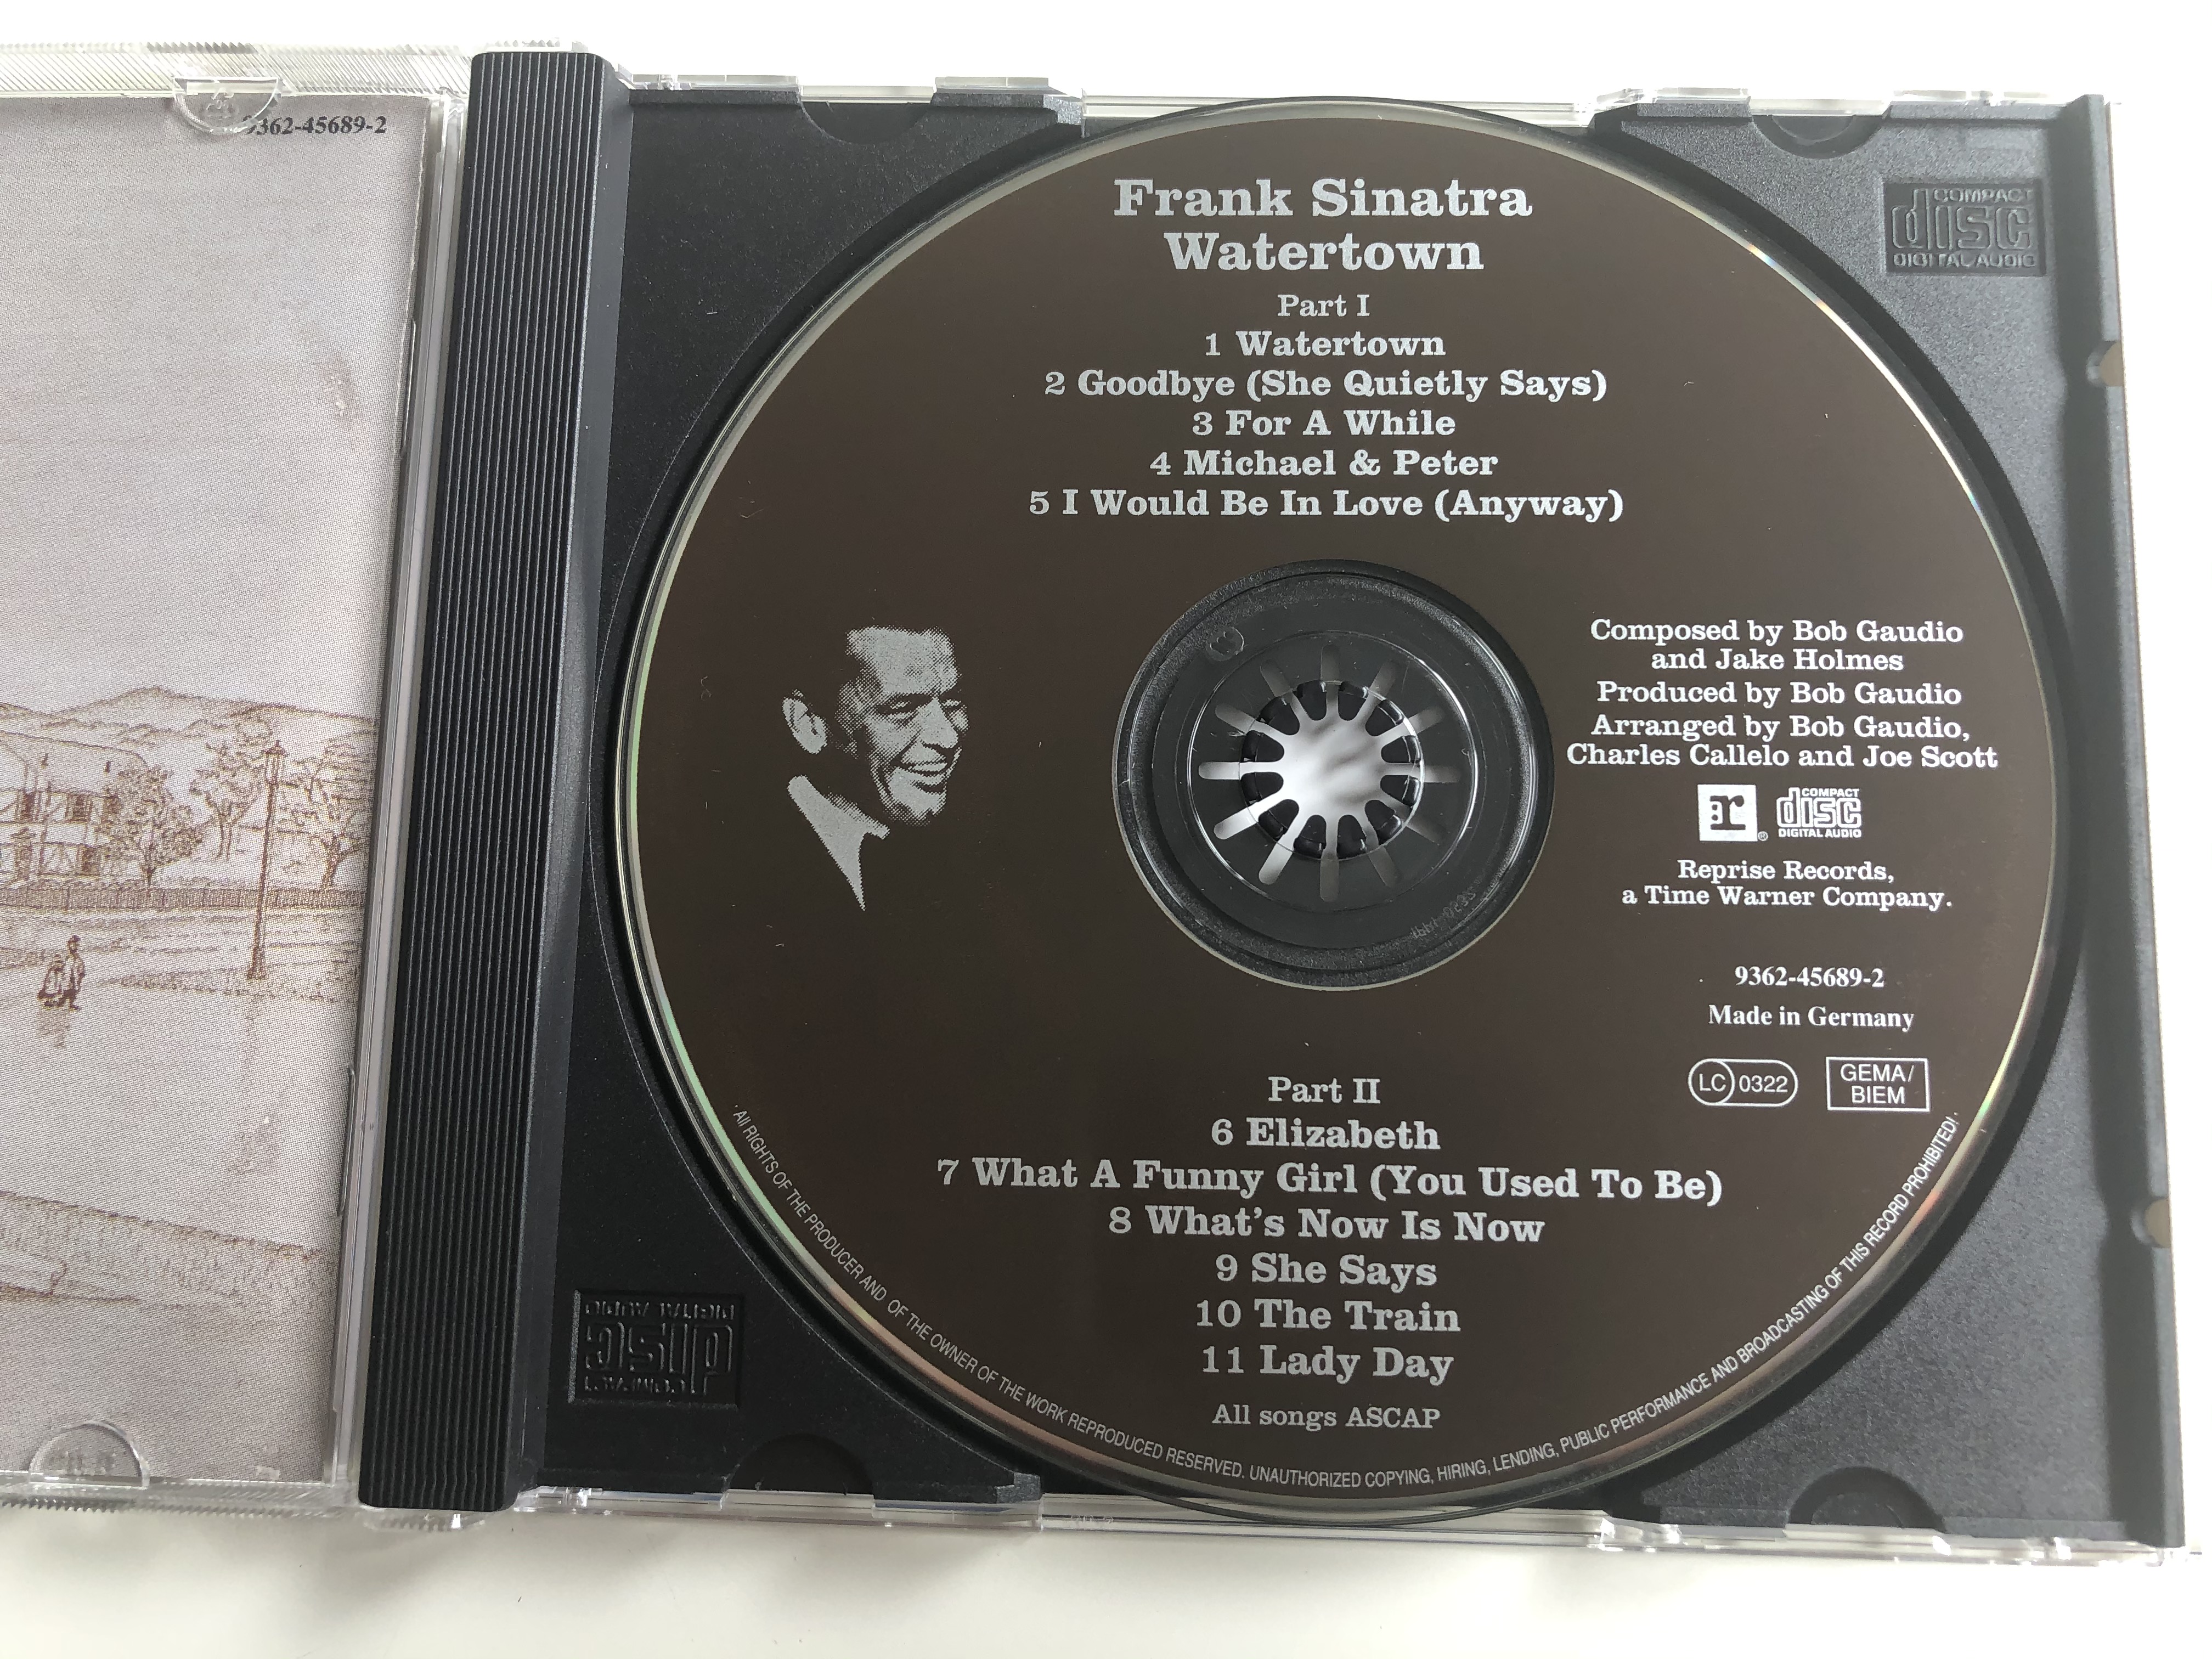 frank-sinatra-watertown-the-sinatra-collection-reprise-records-audio-cd-9362-45689-2-6-.jpg